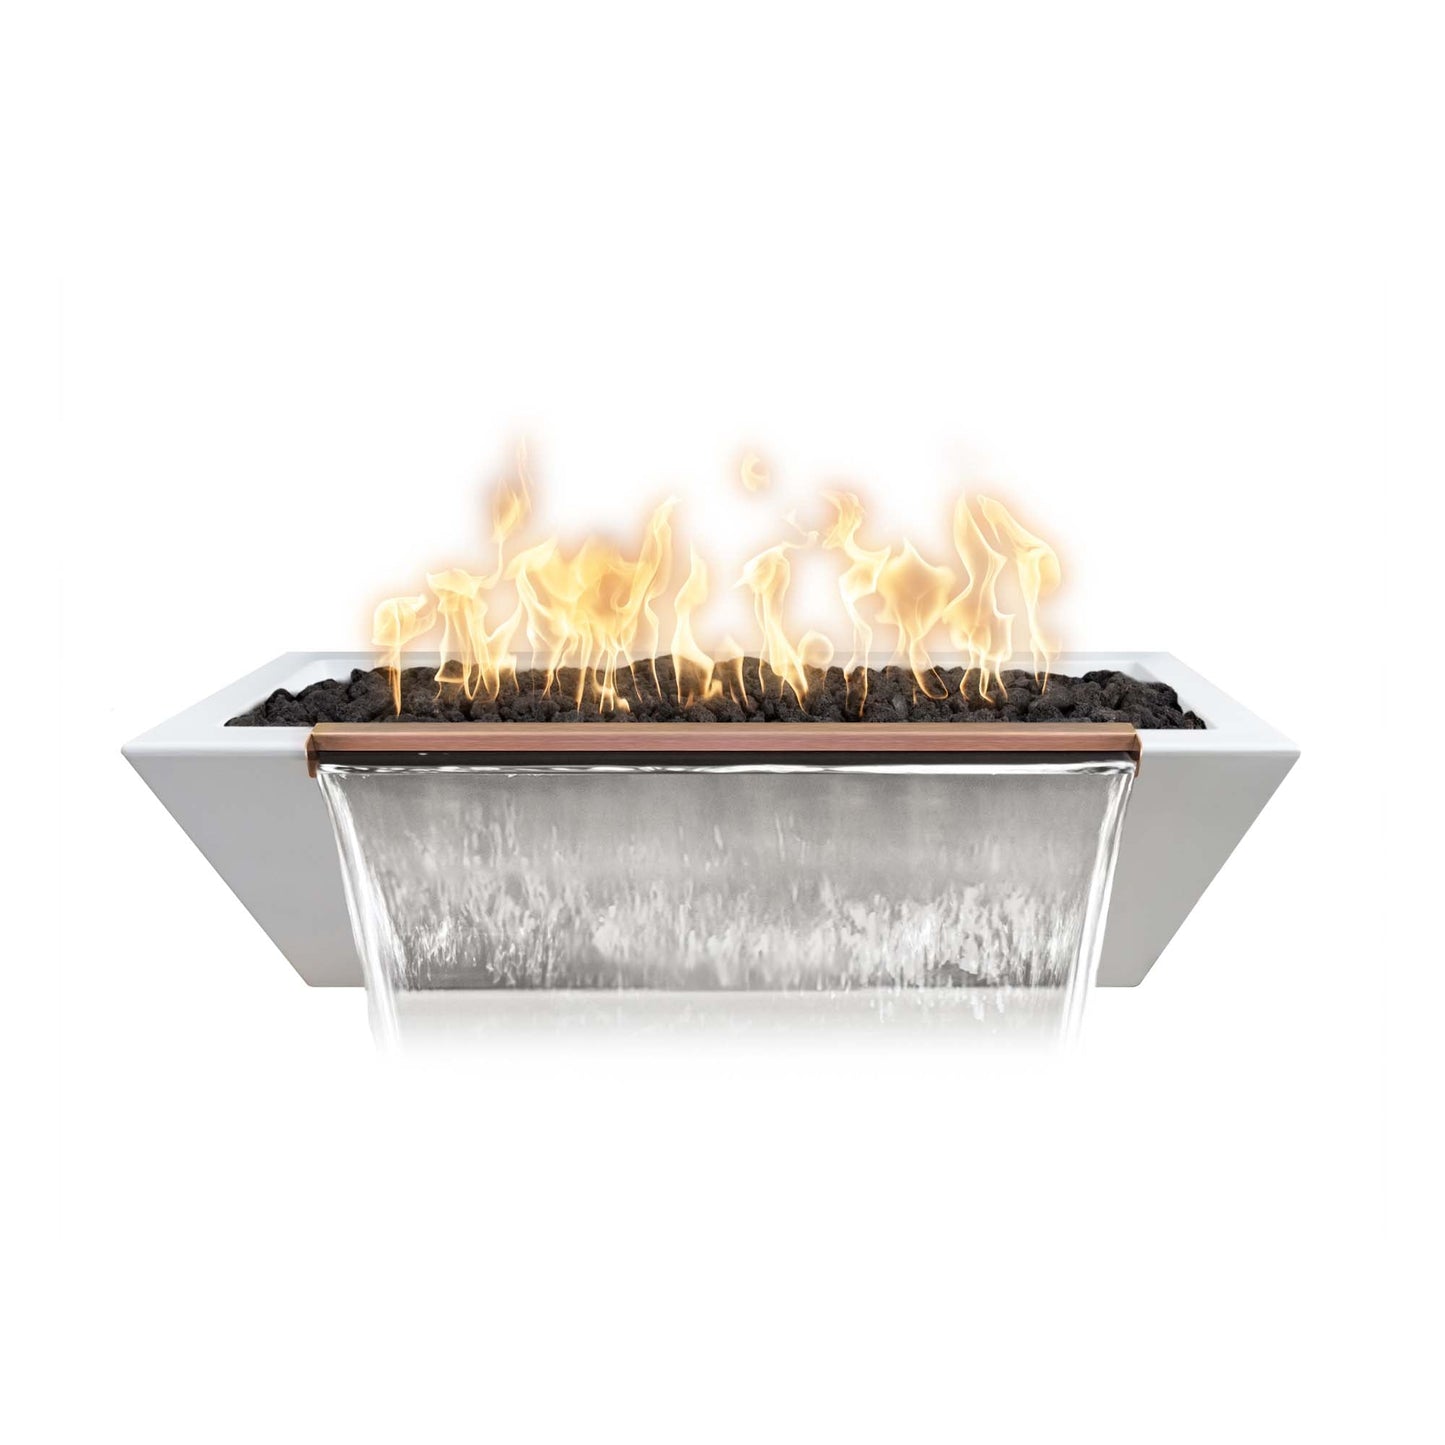 The Outdoor Plus Linear Maya 60" Rustic Coffee GFRC Concrete Natural Gas Fire & Water Bowl with 12V Electronic Ignition